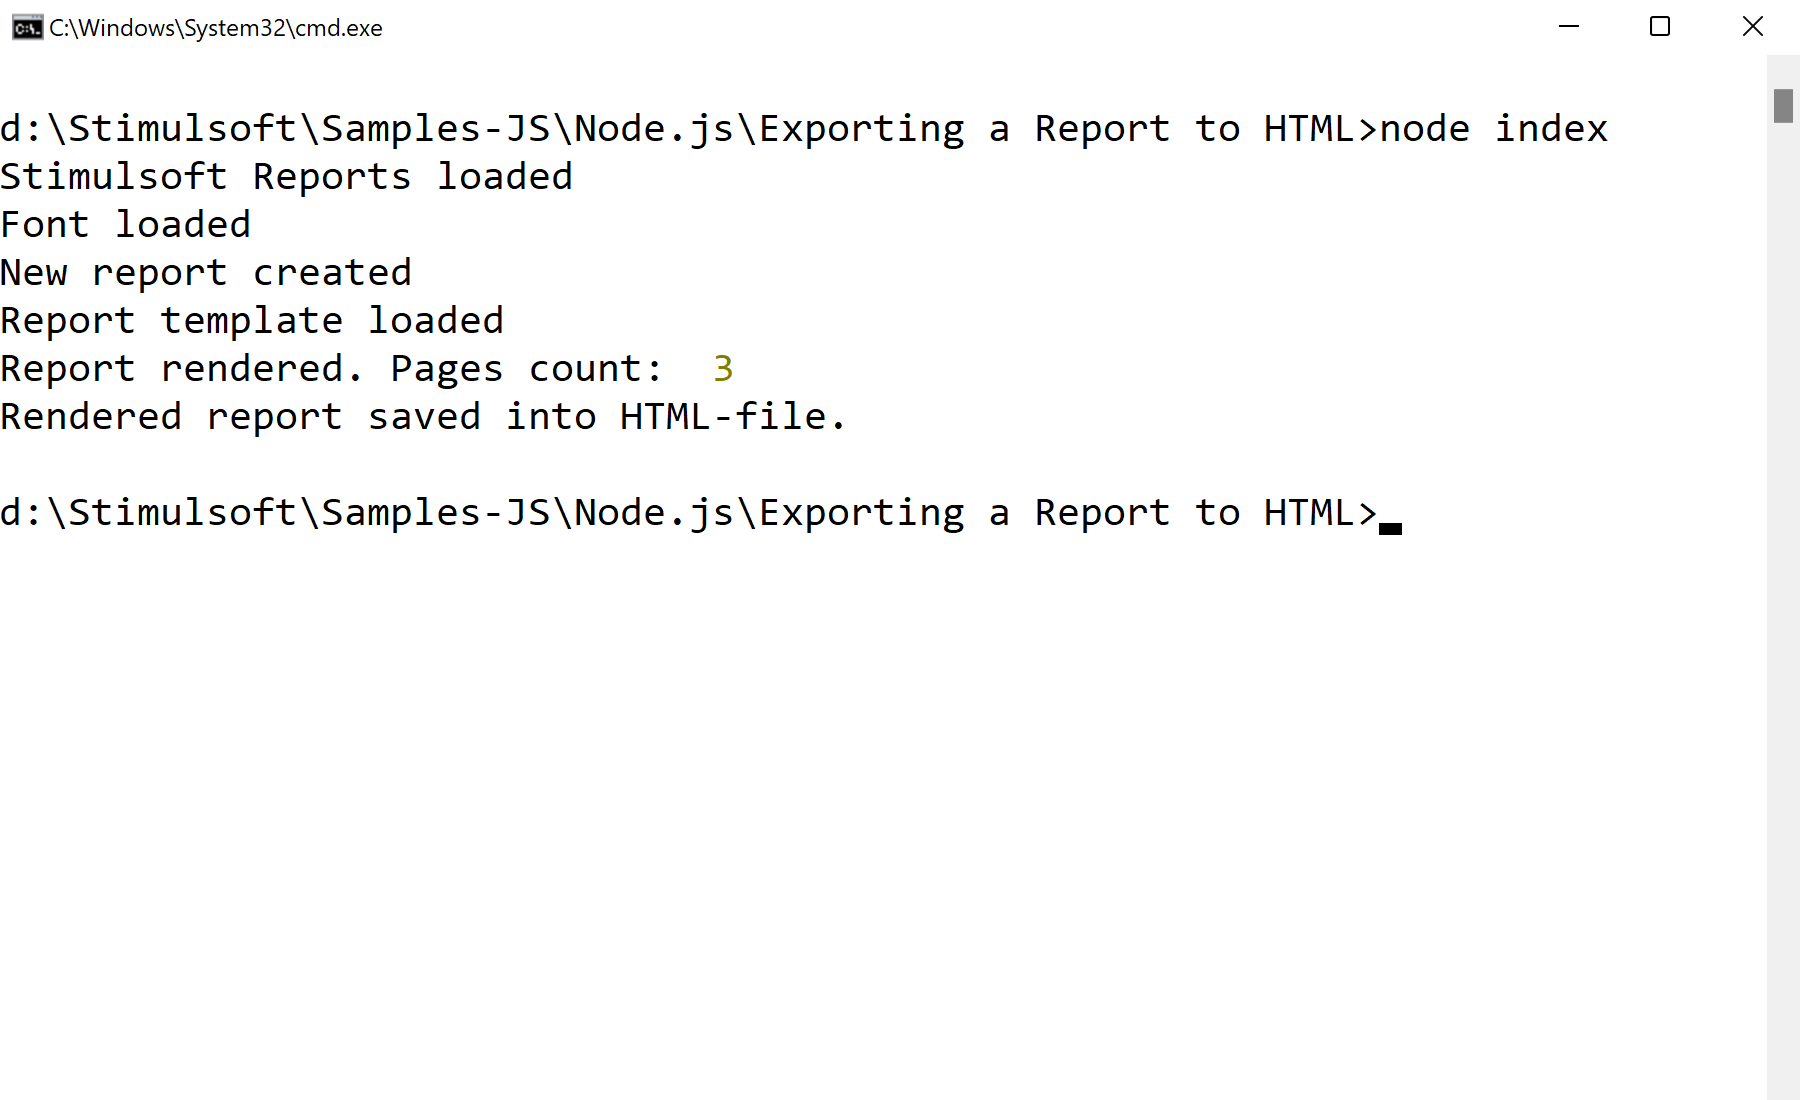 Exporting a Report to HTML